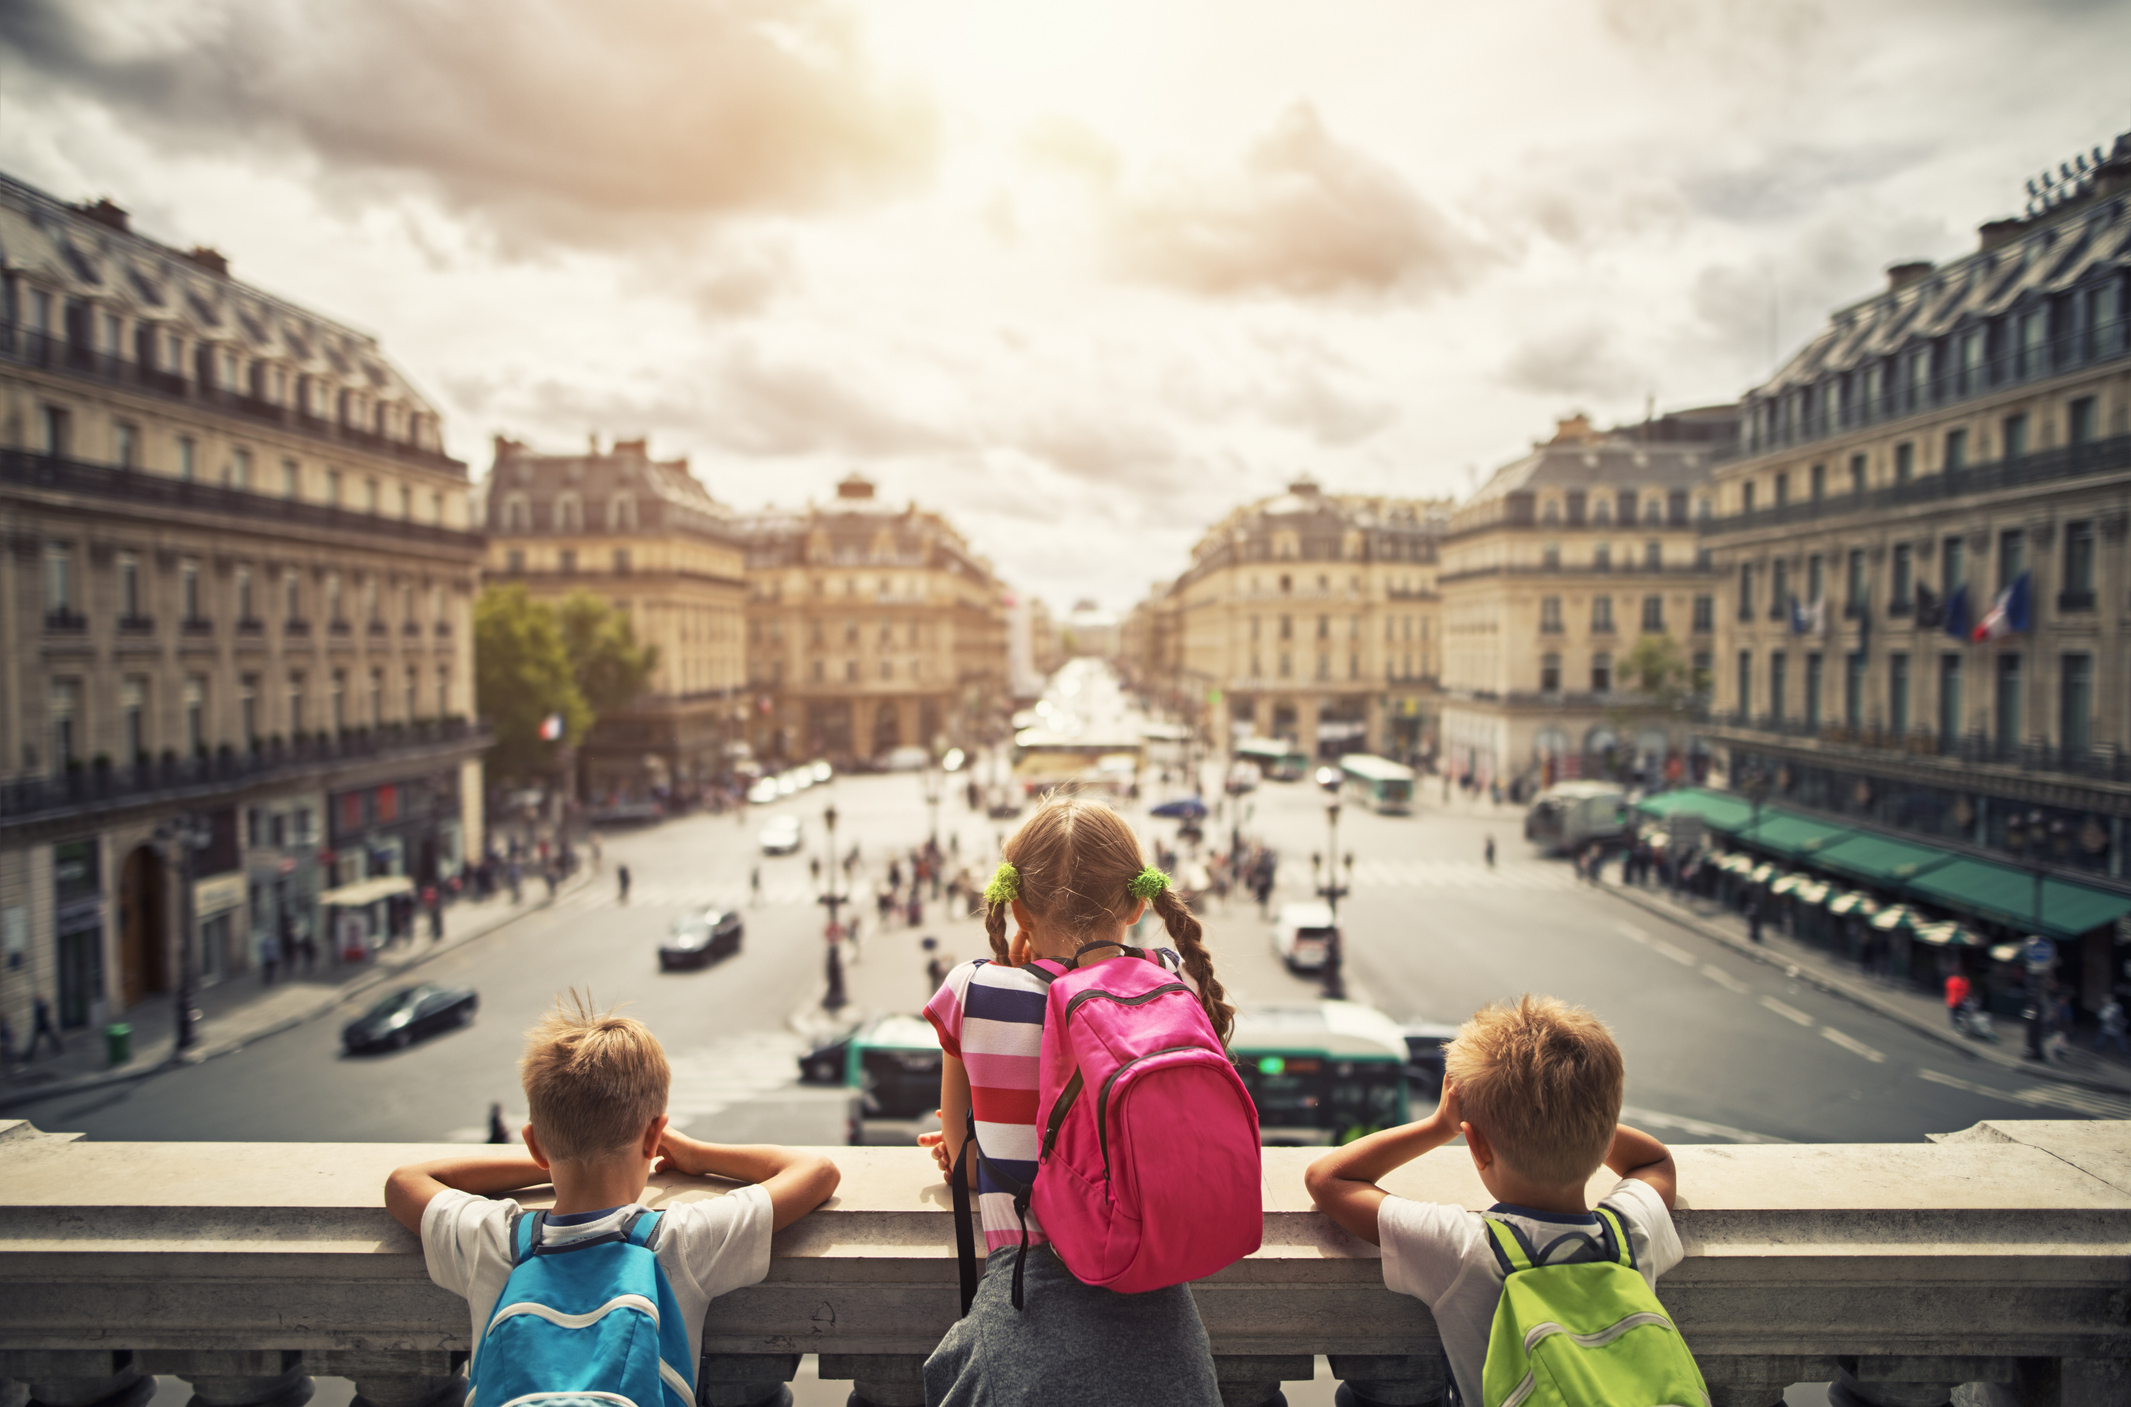 Three children with backpacks looking out over a busy city street from a high vantage point